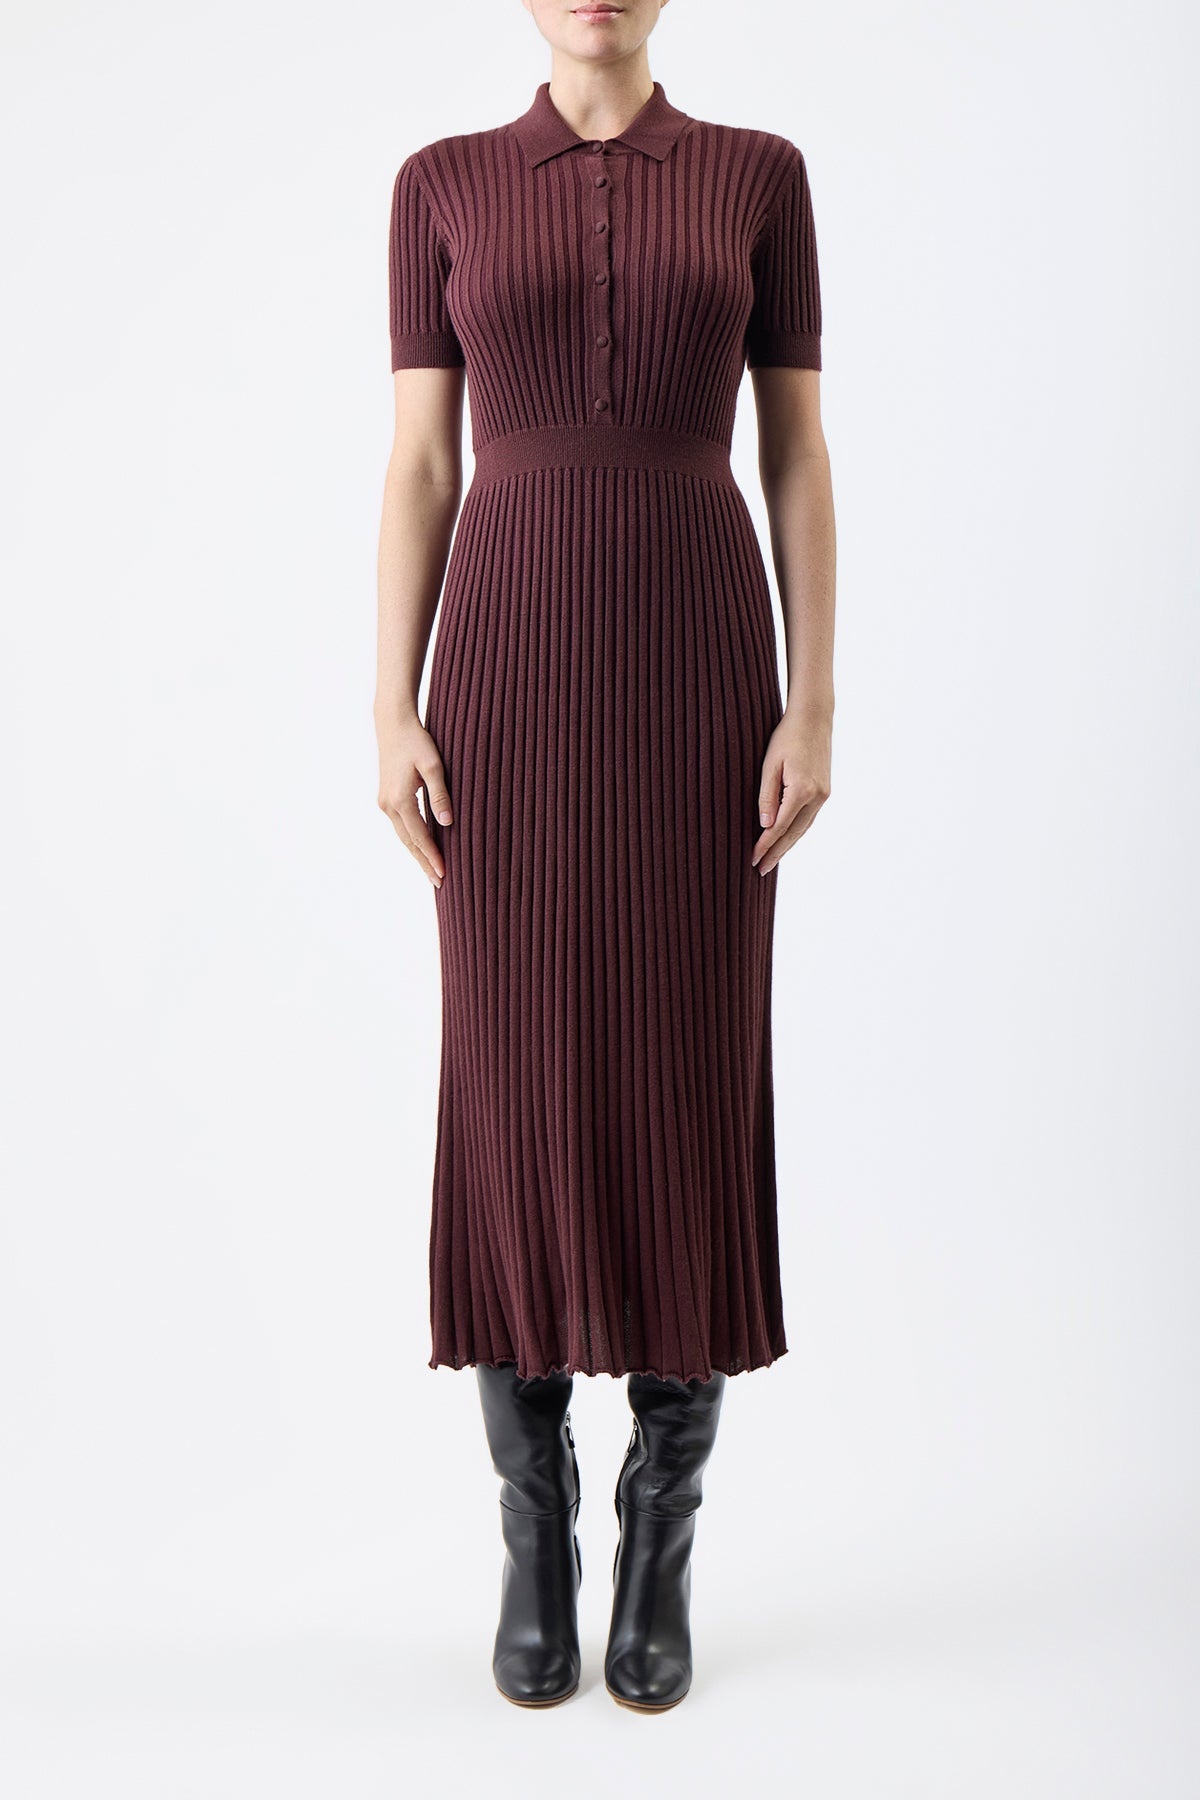 Amor Ribbed Dress in Deep Bordeaux Silk Cashmere - 2